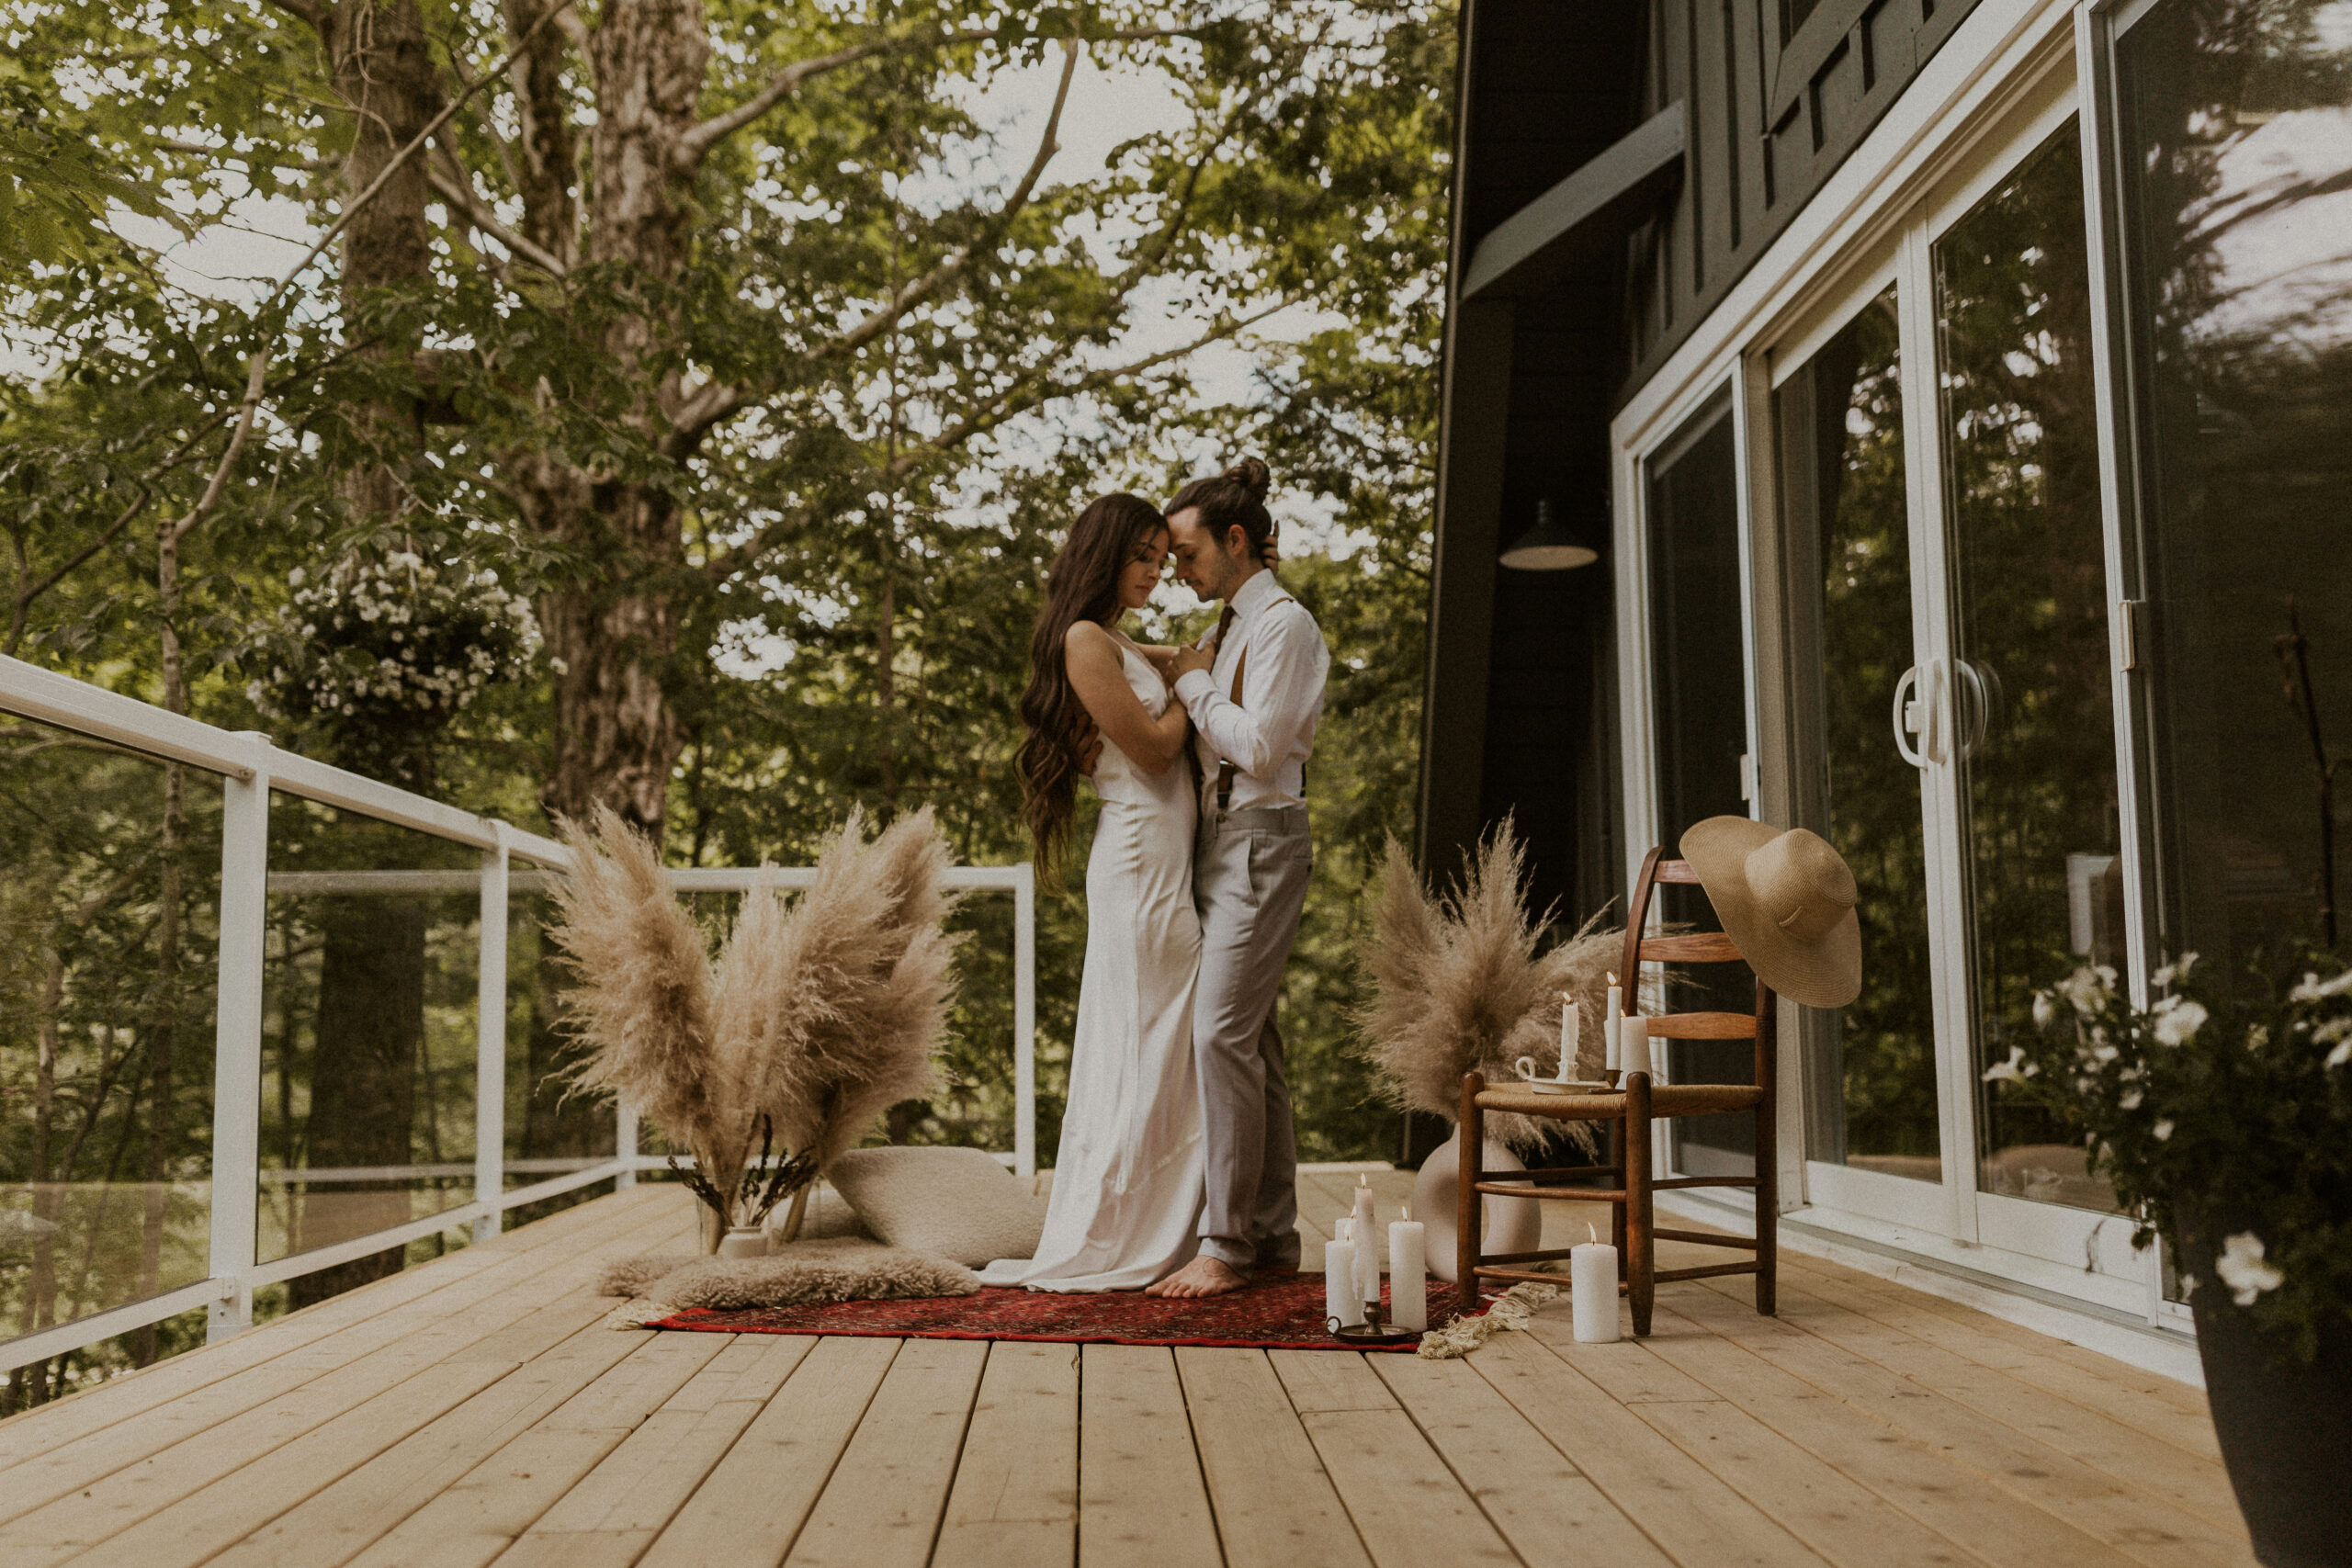 Couple embracing during their elopement ceremony, outside of their A-frame cabin in the forest in southern Ontario.